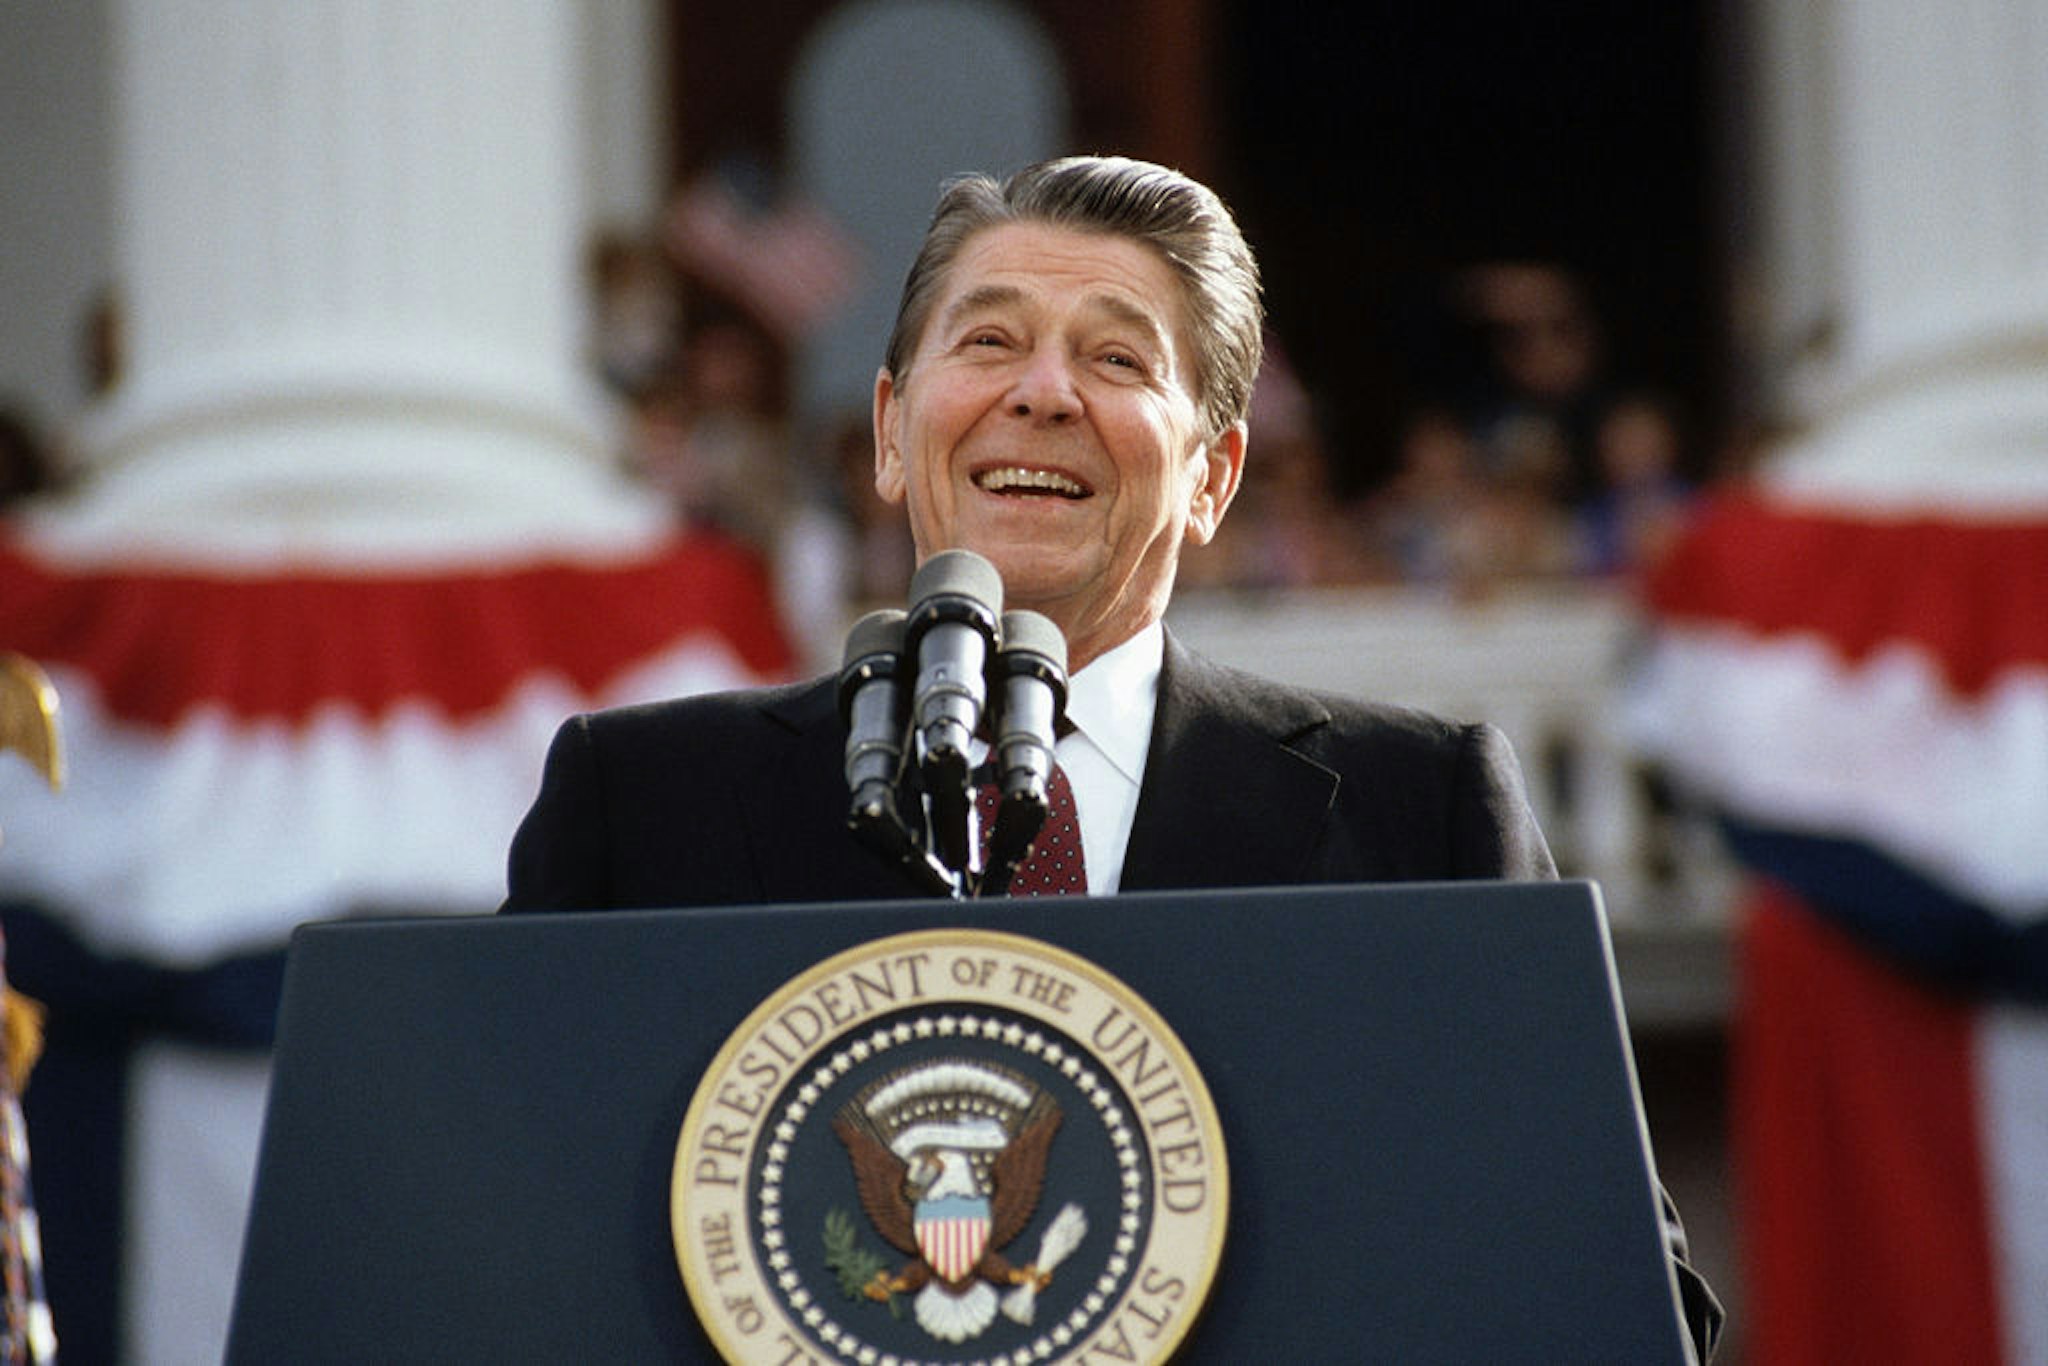 President Ronald Reagan, campaigning for a second term of office, smiles during a rally speech at the California State Capitol the day before the 1984 presidential election. (Photo by © Wally McNamee/CORBIS/Corbis via Getty Images)